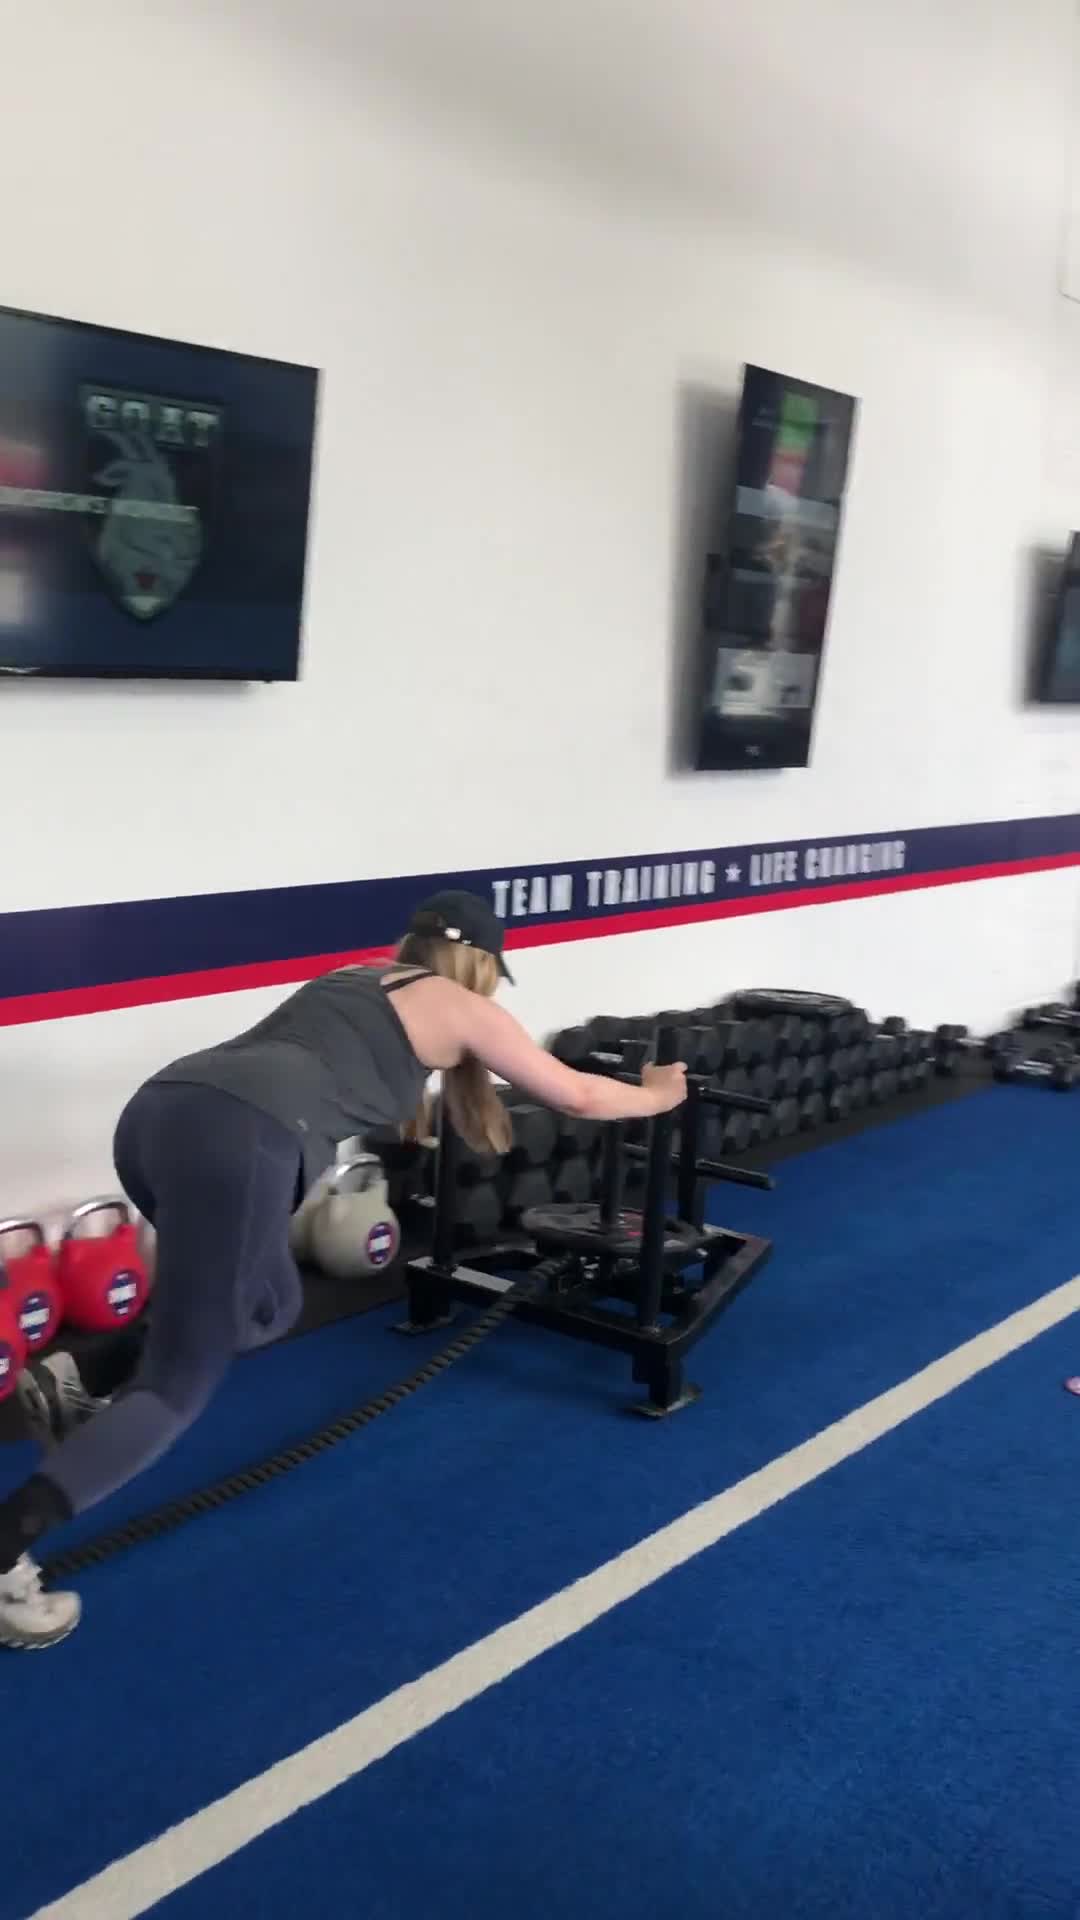 I completed the F45 challenge, these are my honest results